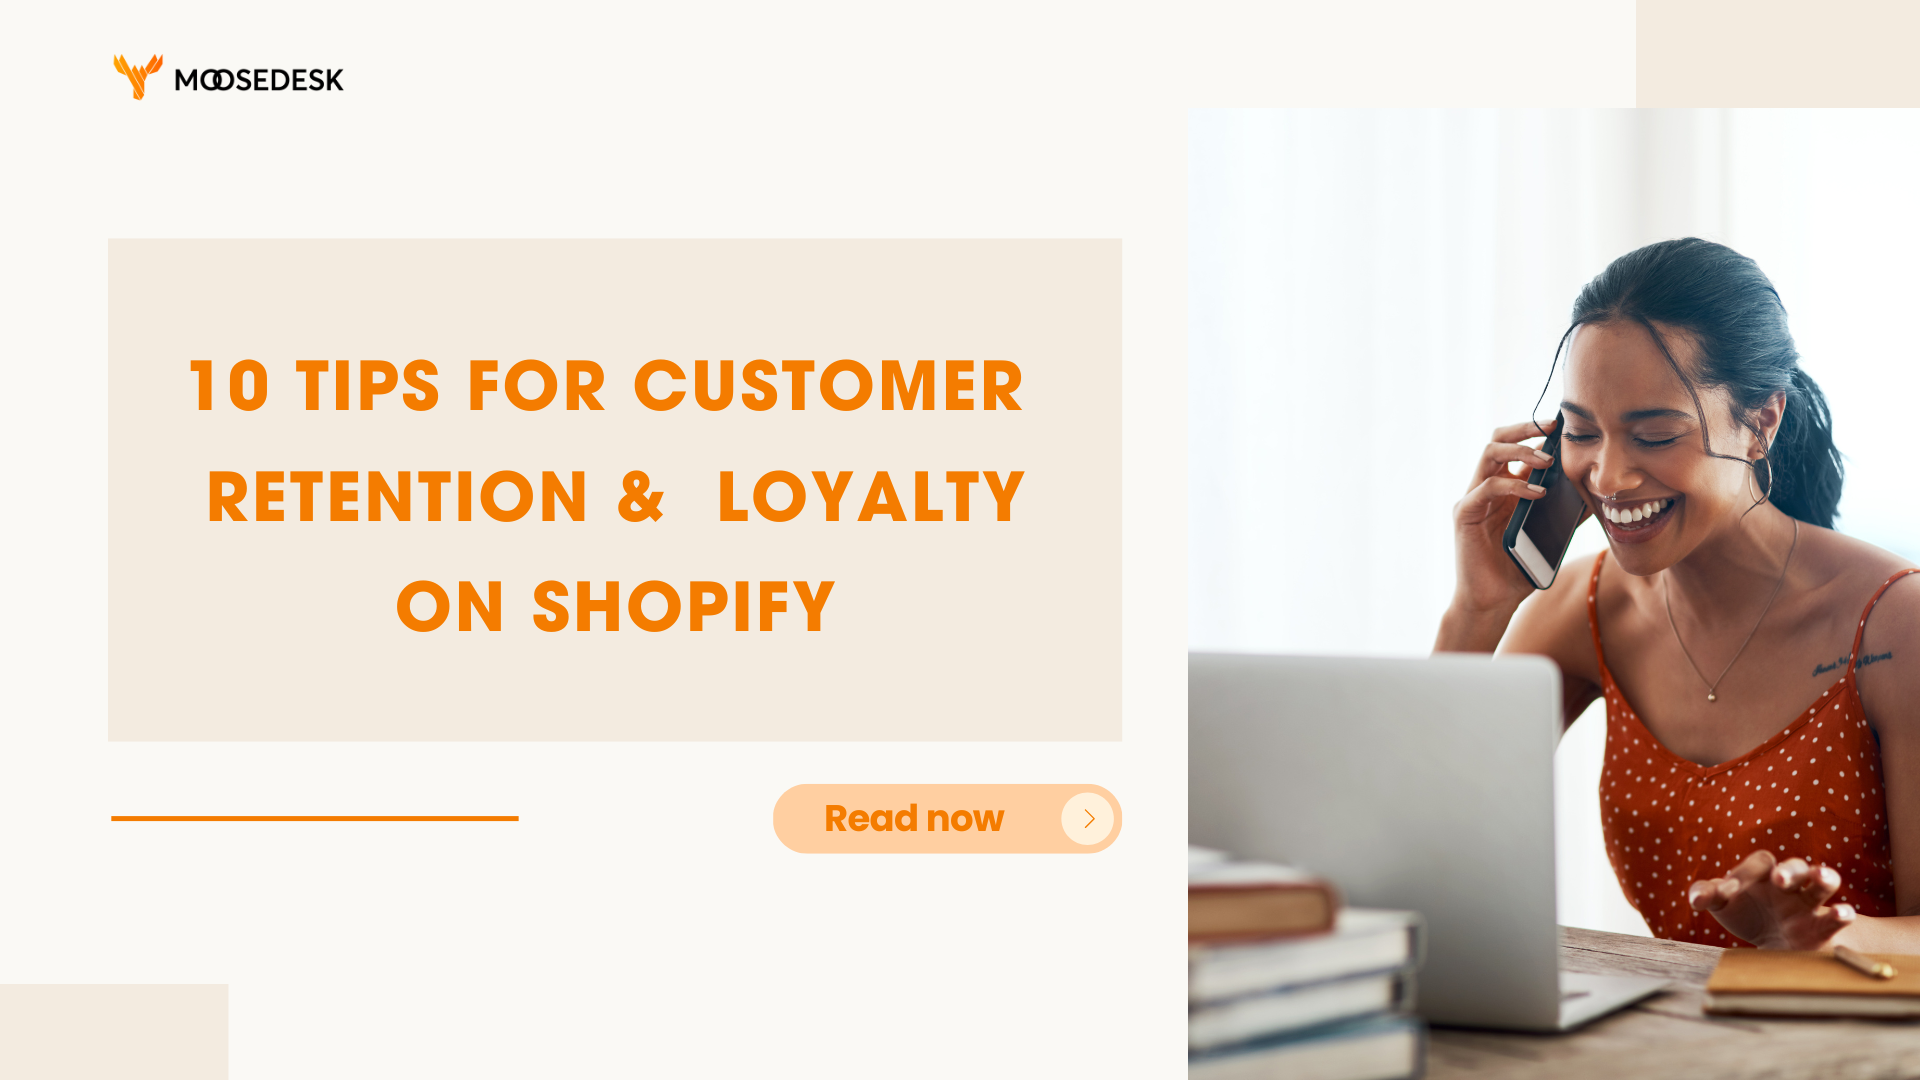 10 tips for customer retention & loyalty on shopify